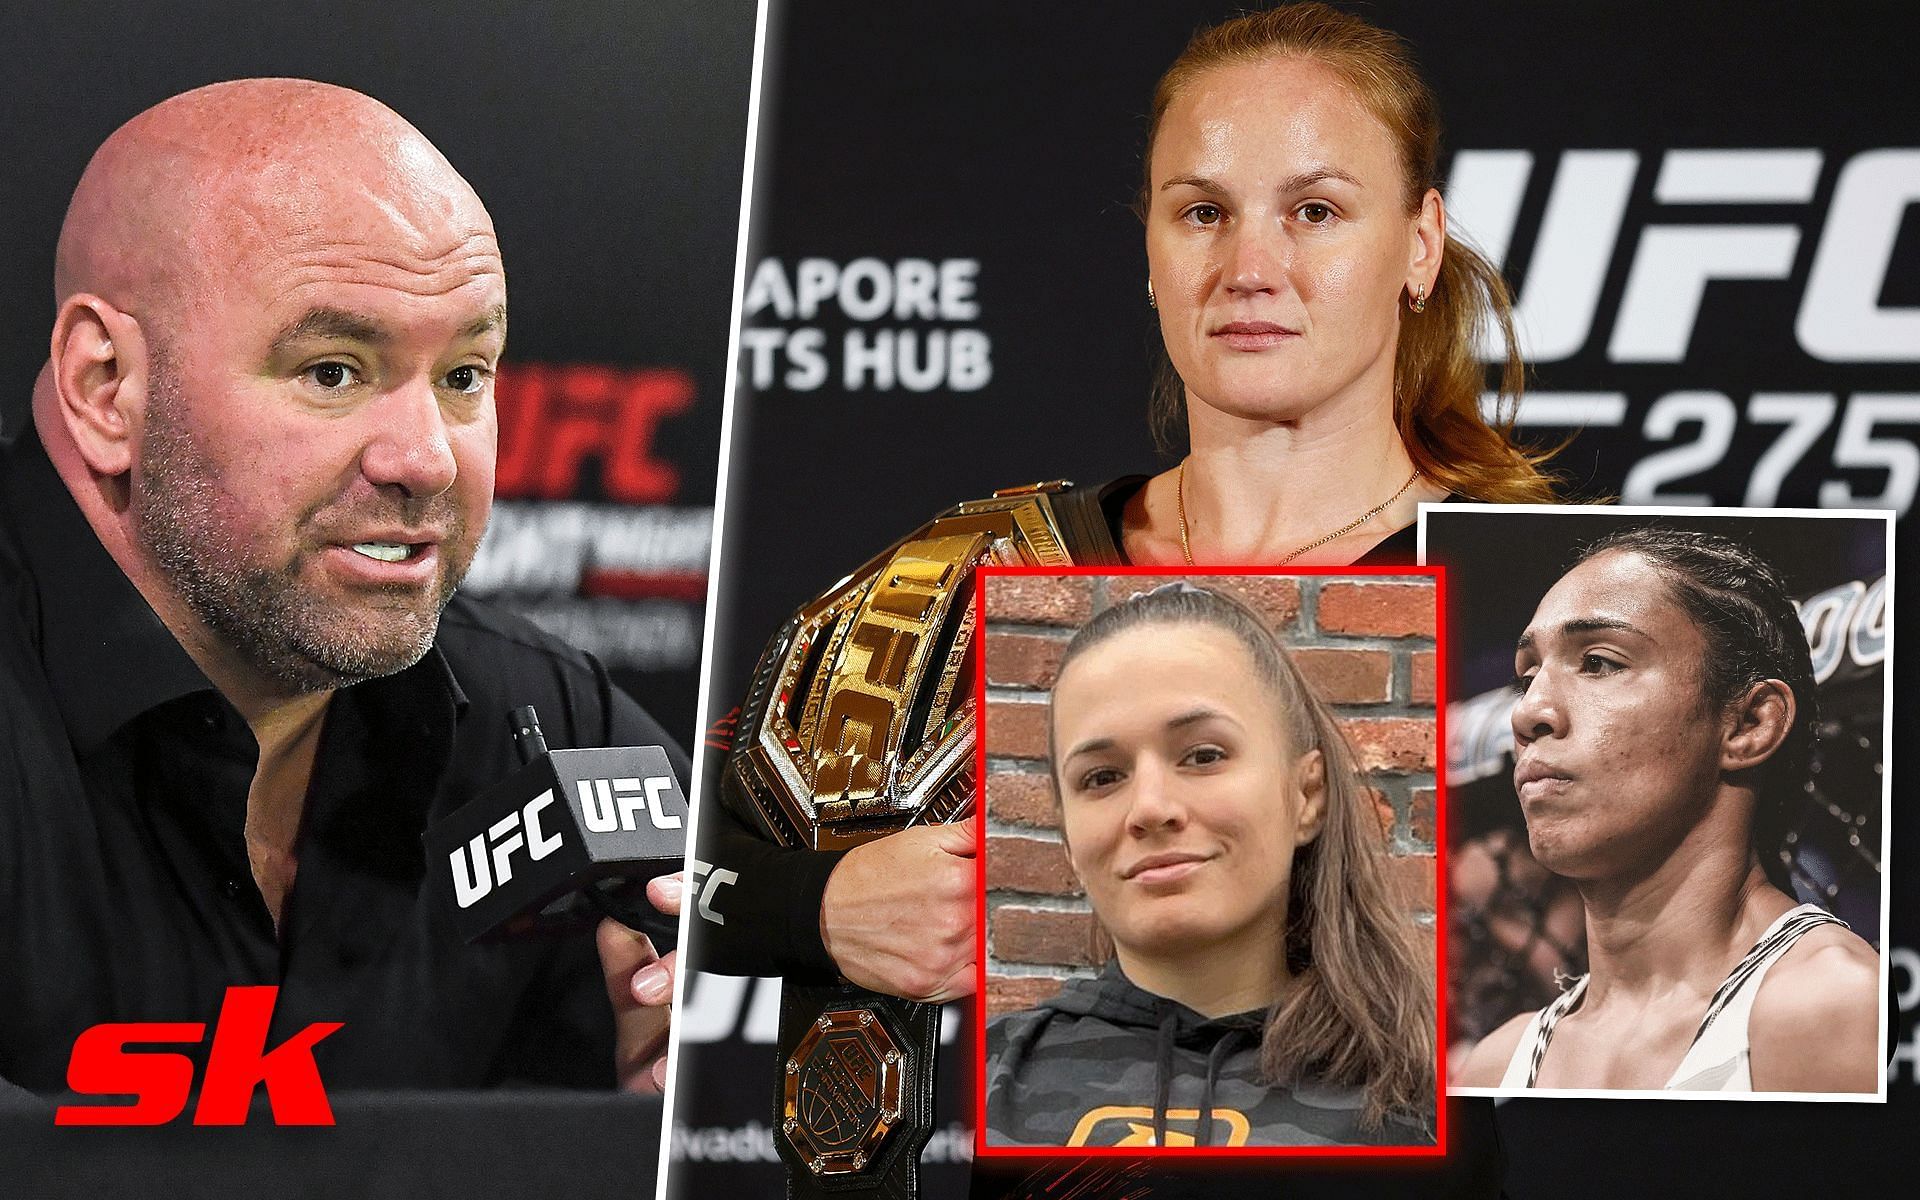 Dana White claims Erin Blanchfield next in line for titel shot [Images via: @tailasantos.ufc and blanchfield_mma on Instagram]